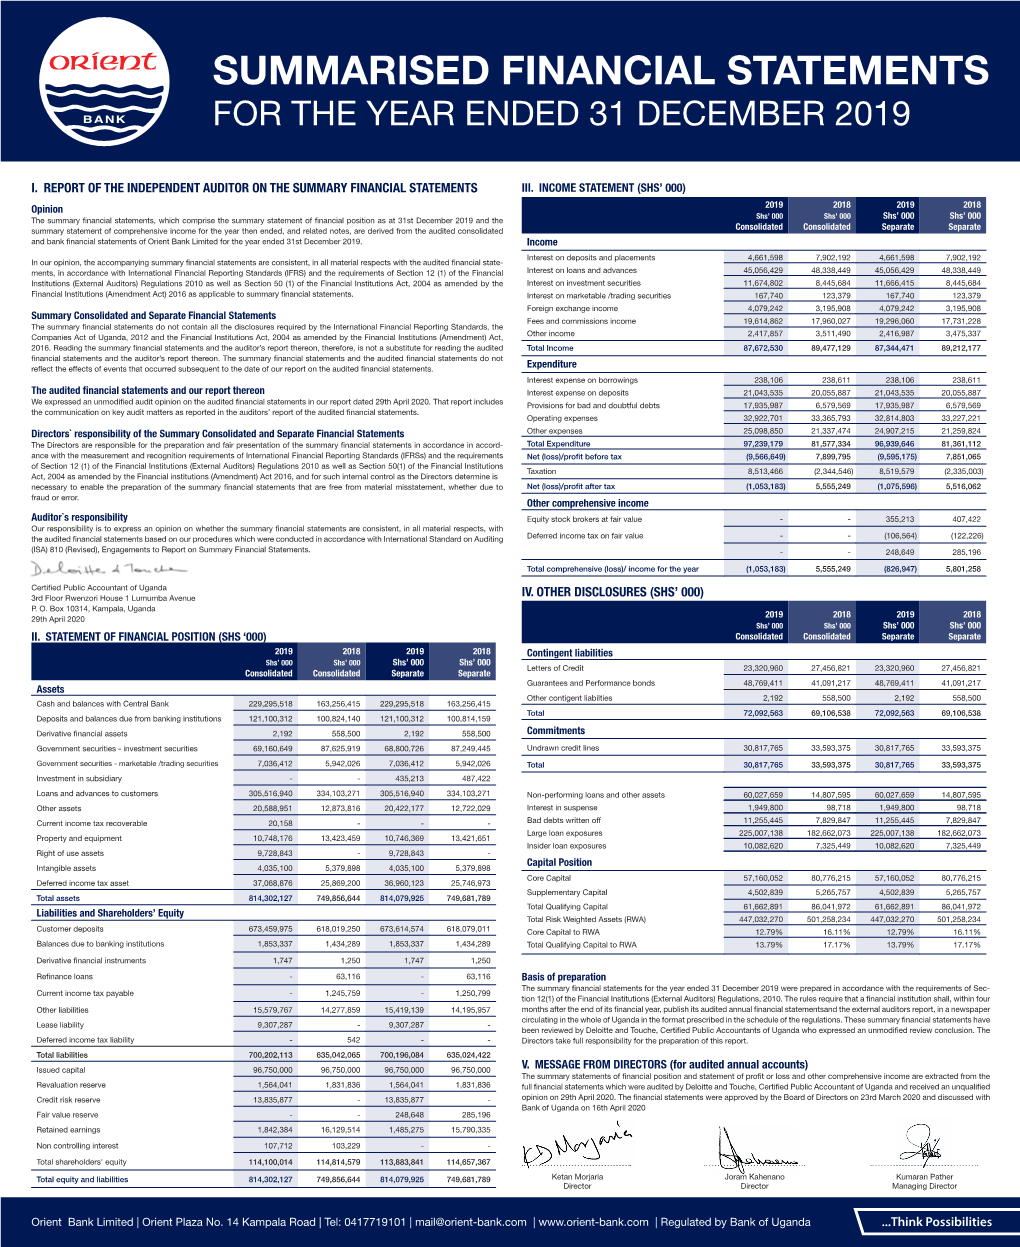 Summarised Financial Statements for the Year Ended 31 December 2019